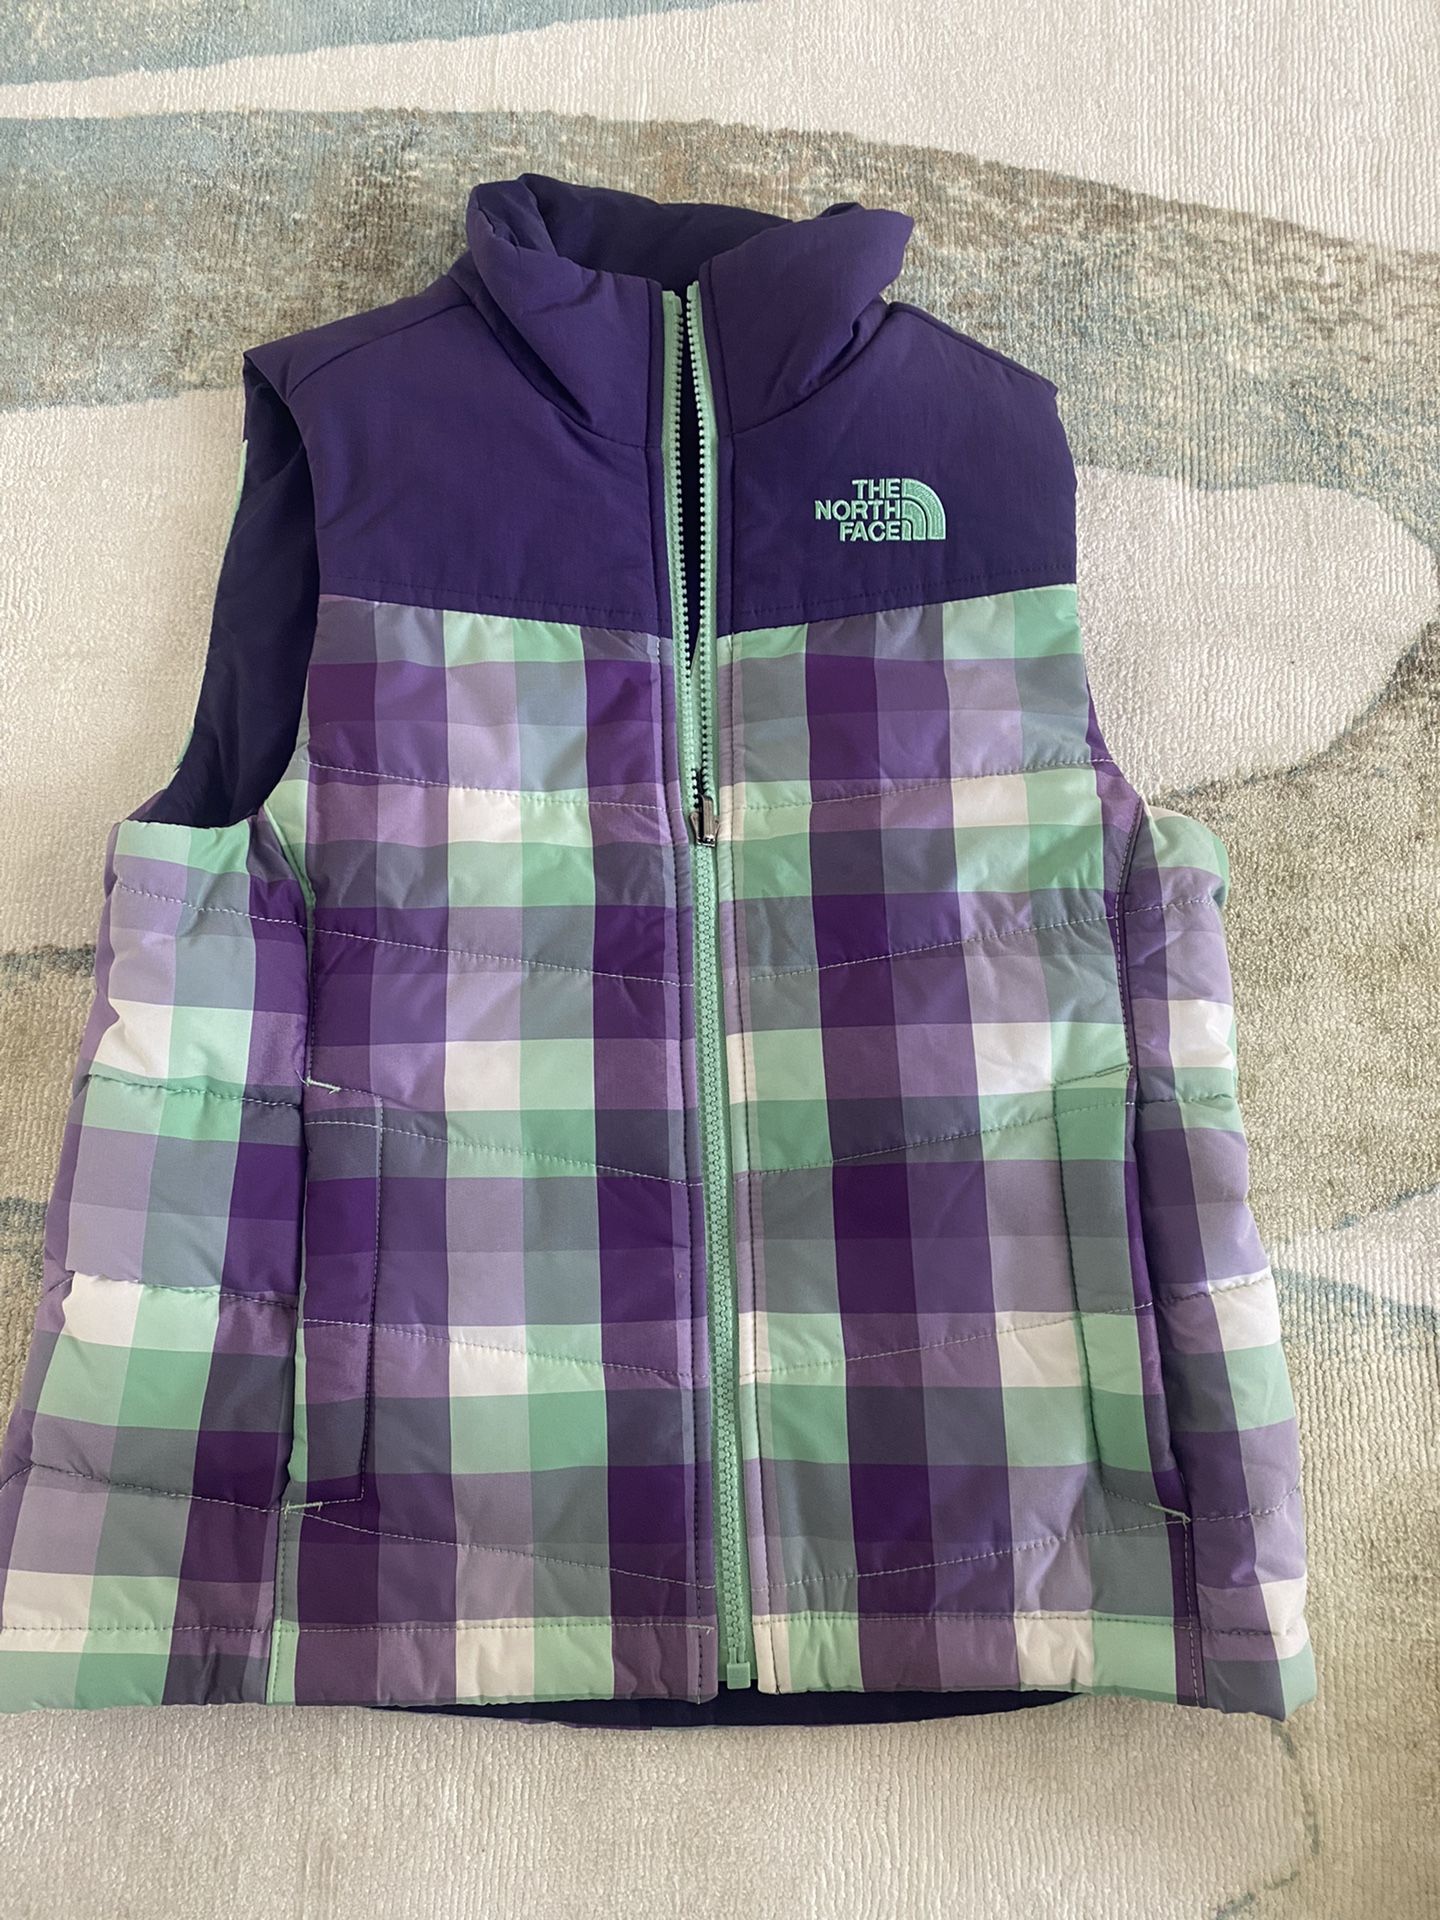 The North Face Girl's Purple Plaid Puffer Vest Size Small (7/8) S/P. Grey condition, make an offer!